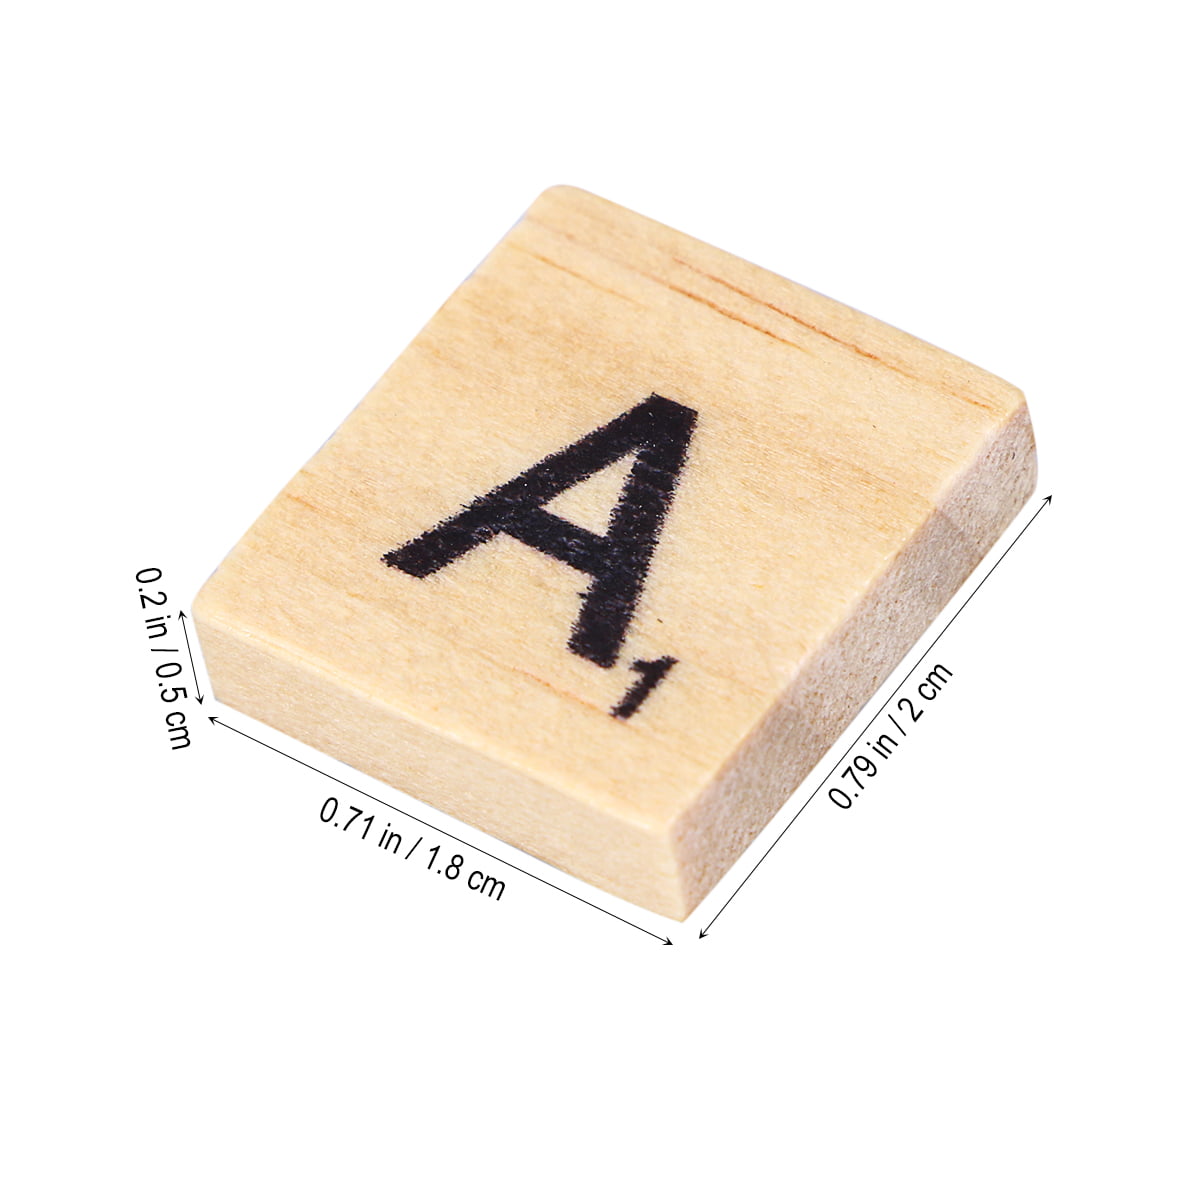 Select your letter for game/craft Vintage Plastic Scrabble Letters Square Back 